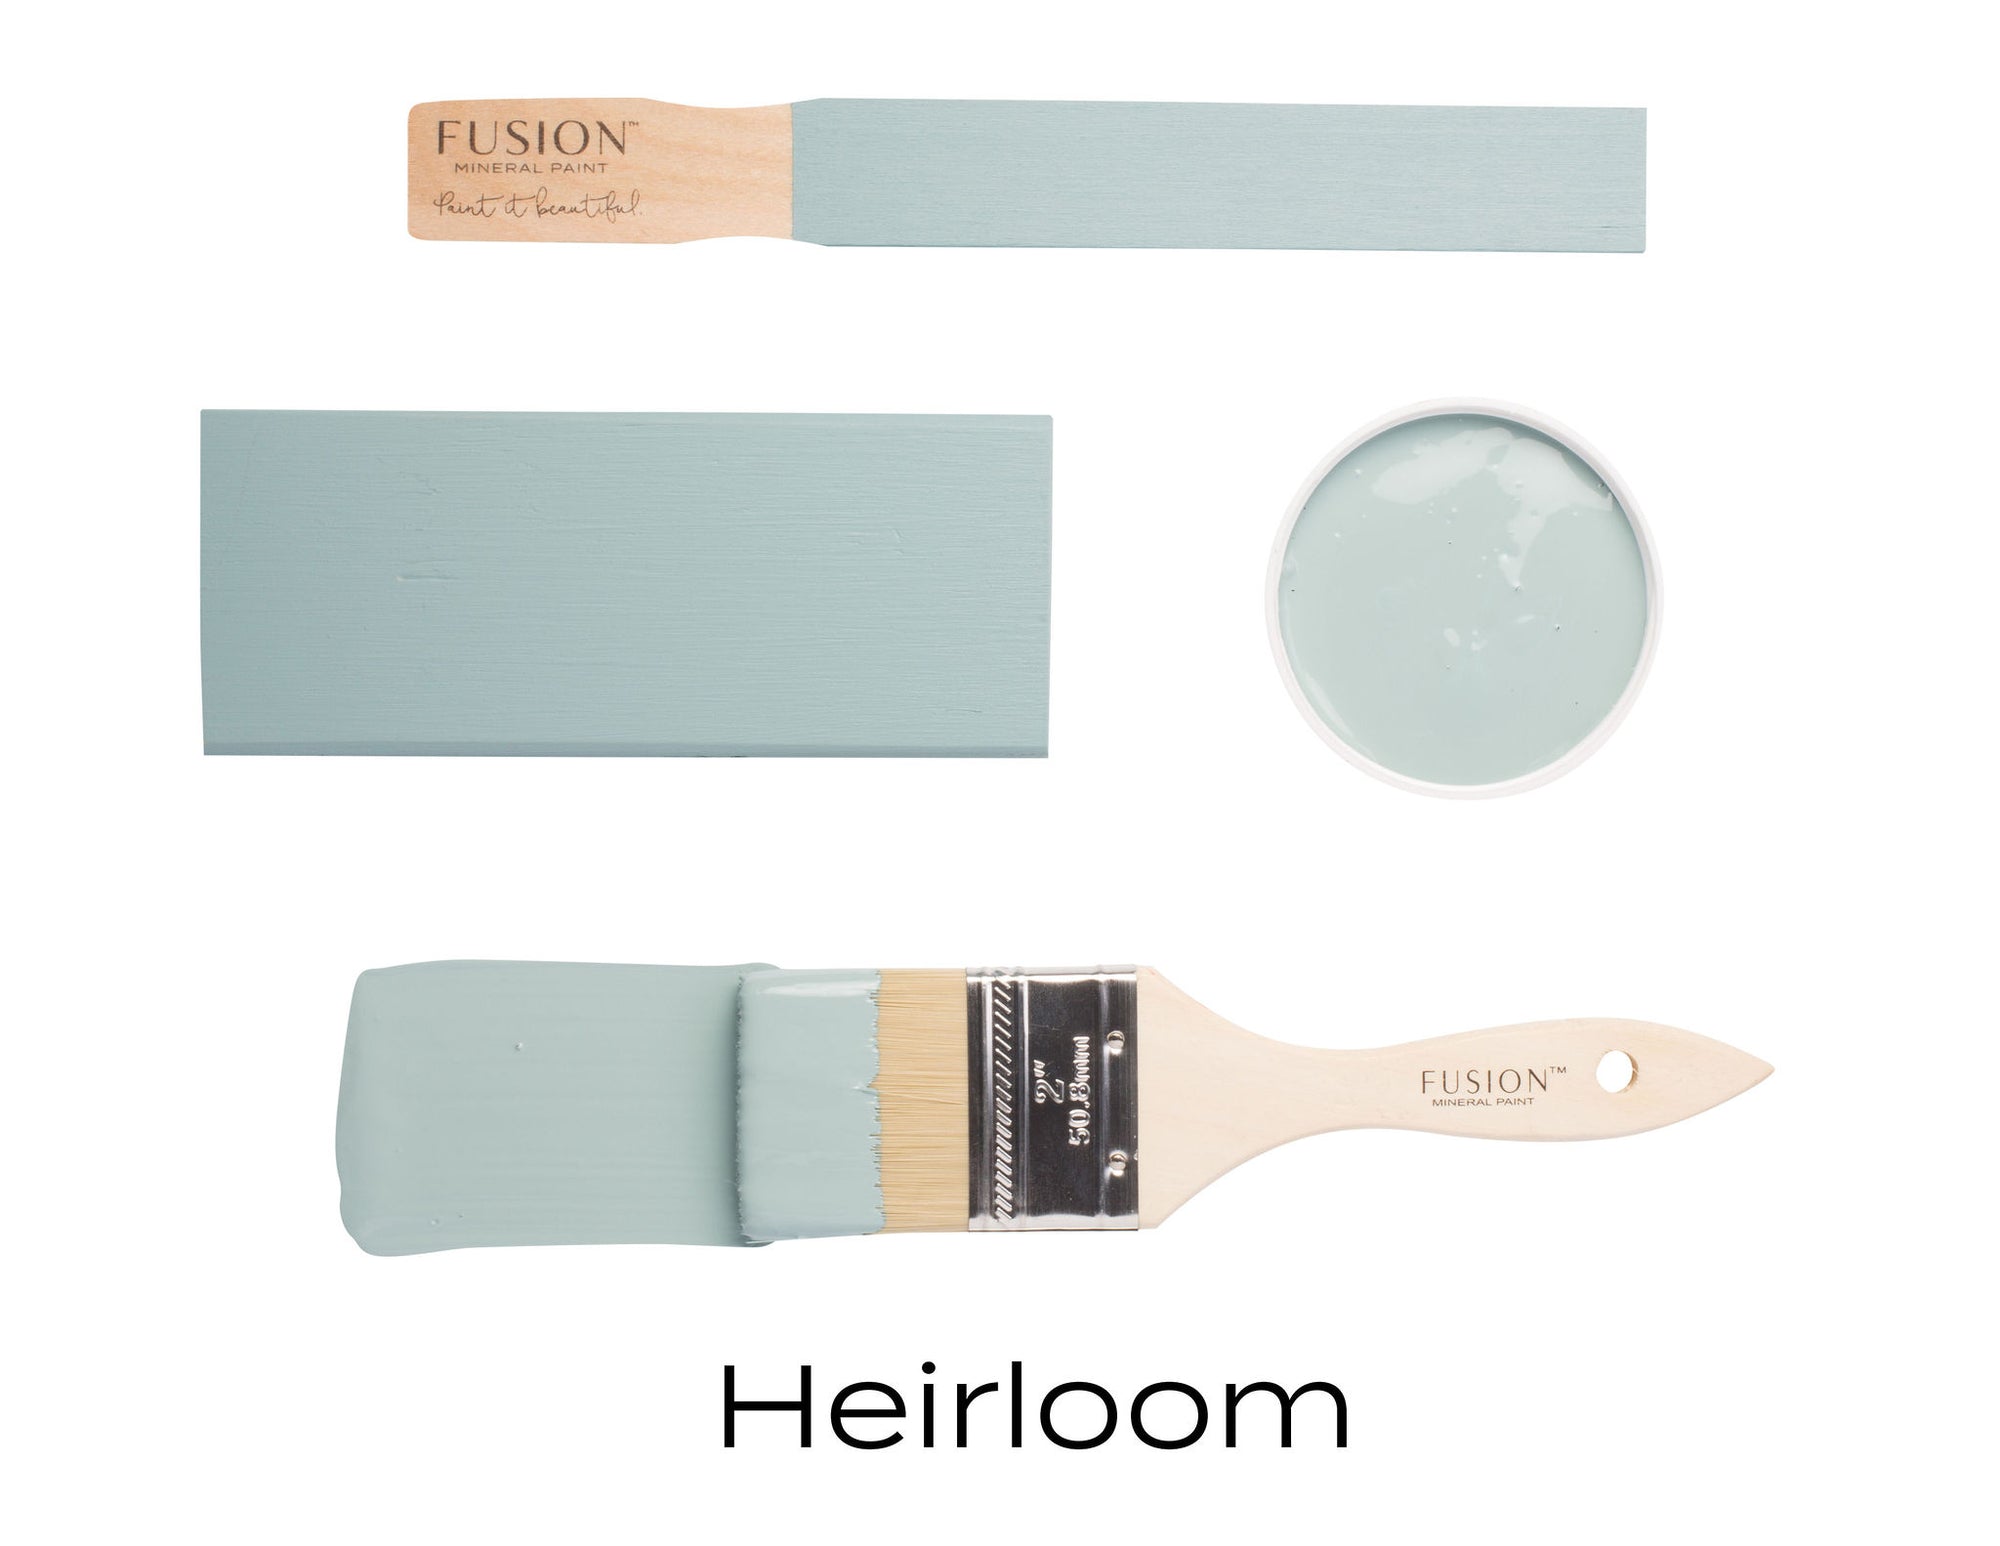 Fusion Mineral Paint Heirloom